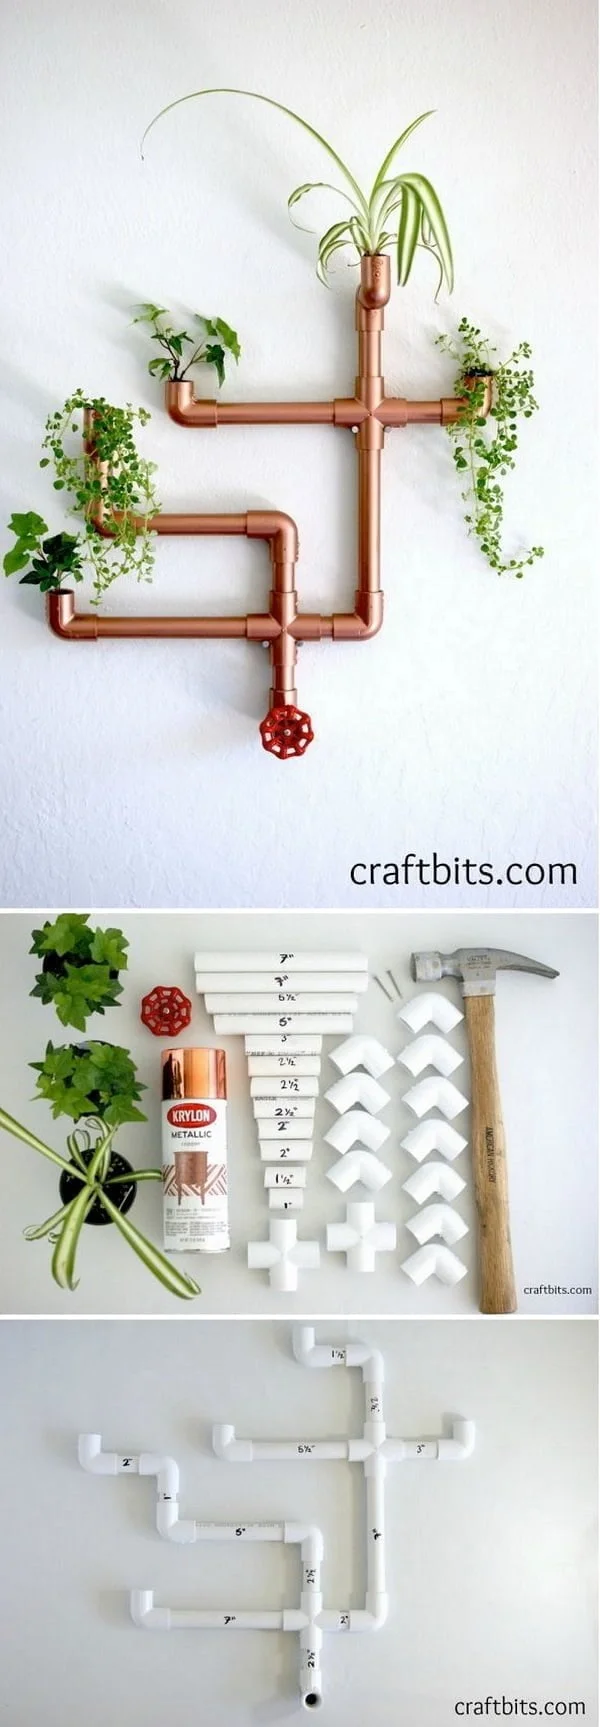 Check out how to make this cute DIY copper pipe wall planter @istandarddesign